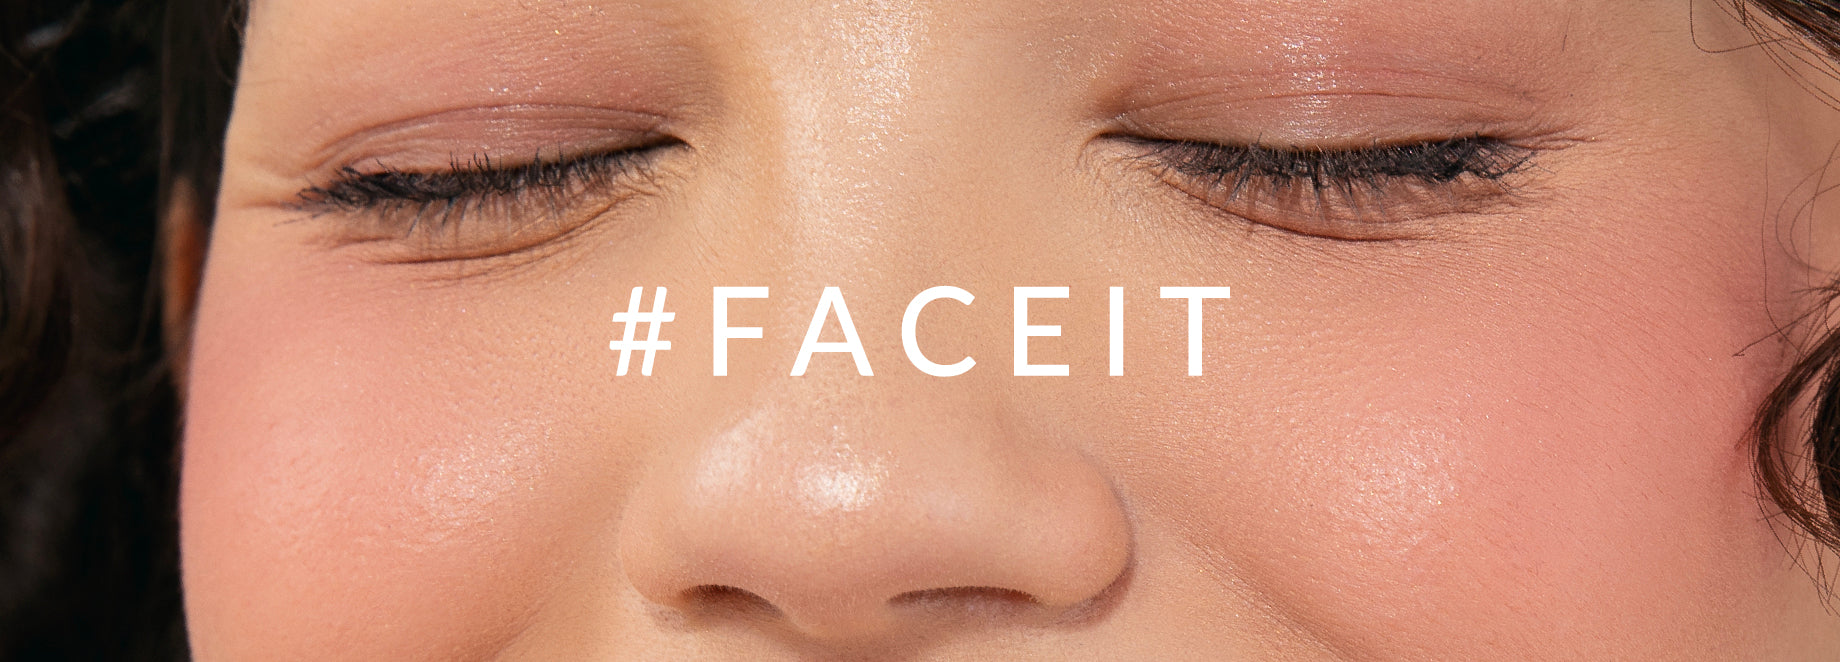 face it collection